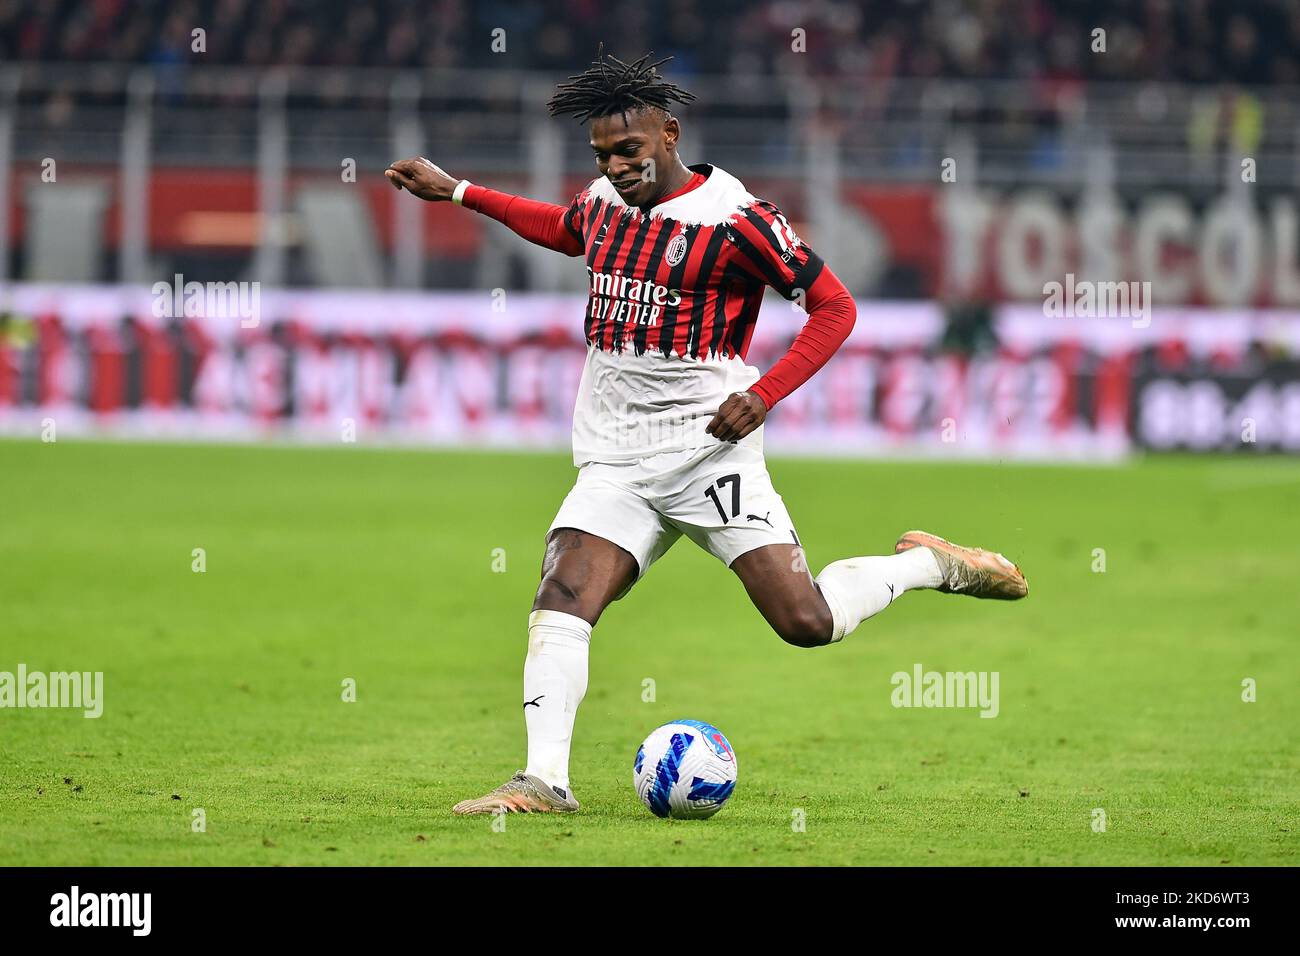 Rafael Leao of A.C. Milan during the Italian Serie A soccer match between A.C. Milan vs Bologna F.C. at the San Siro Stadium in Milan, Italy on 4 April 2022. (Photo by Michele Maraviglia/NurPhoto) Stock Photo